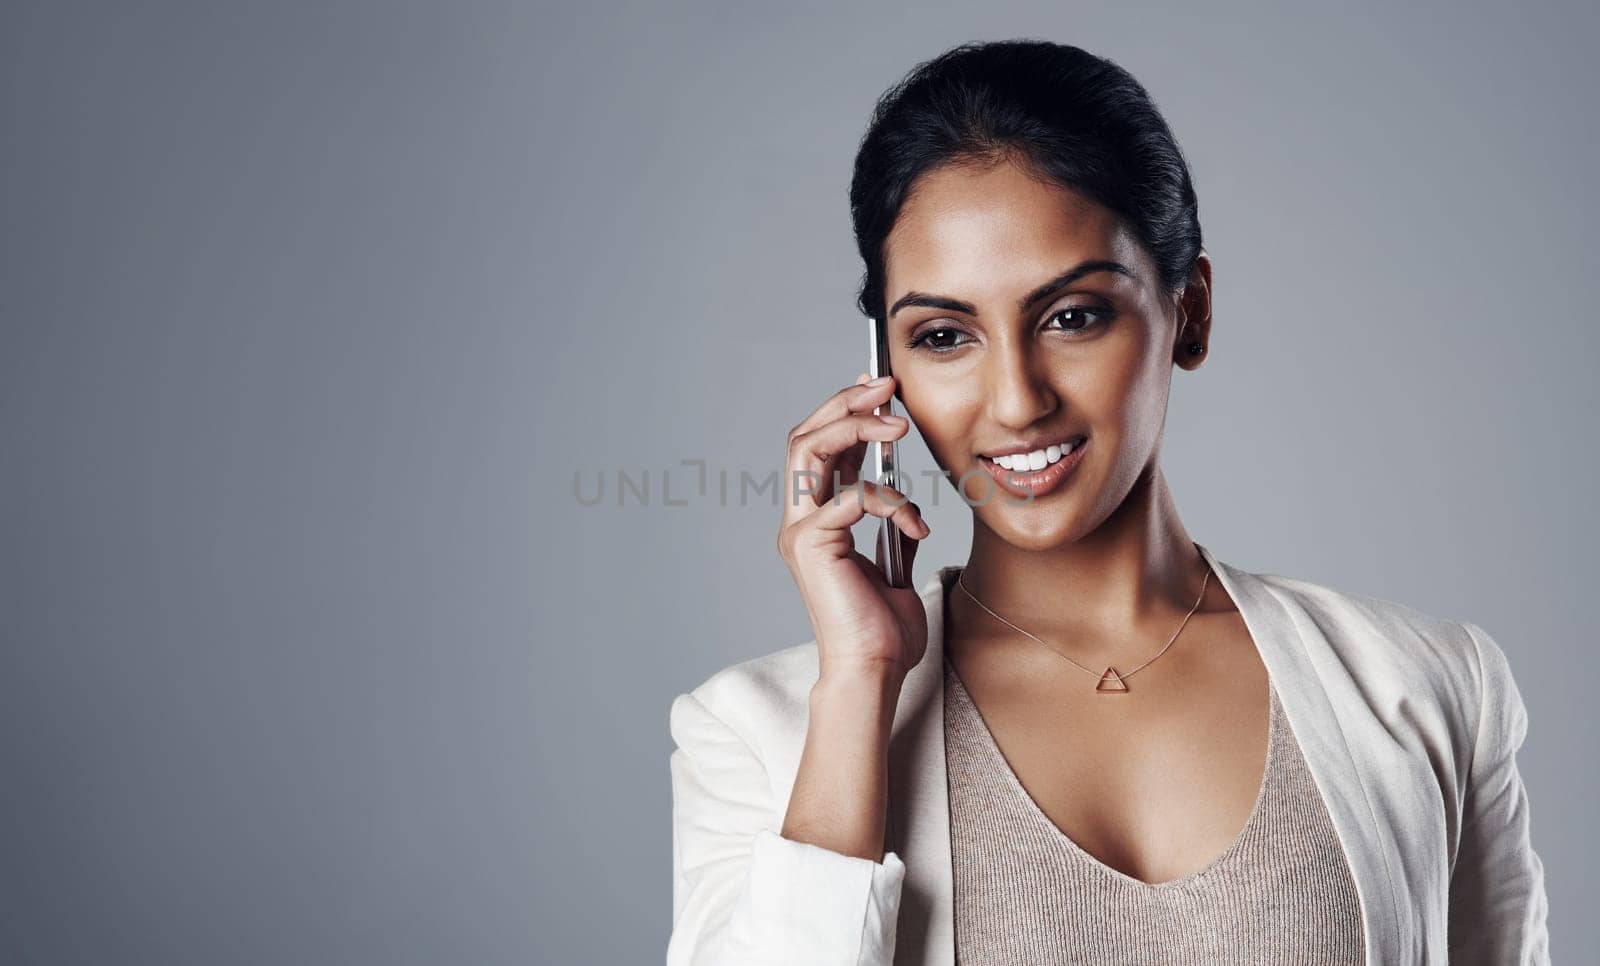 Connecting with other business minded people. Studio shot of a young businesswoman using a phone against a gray background